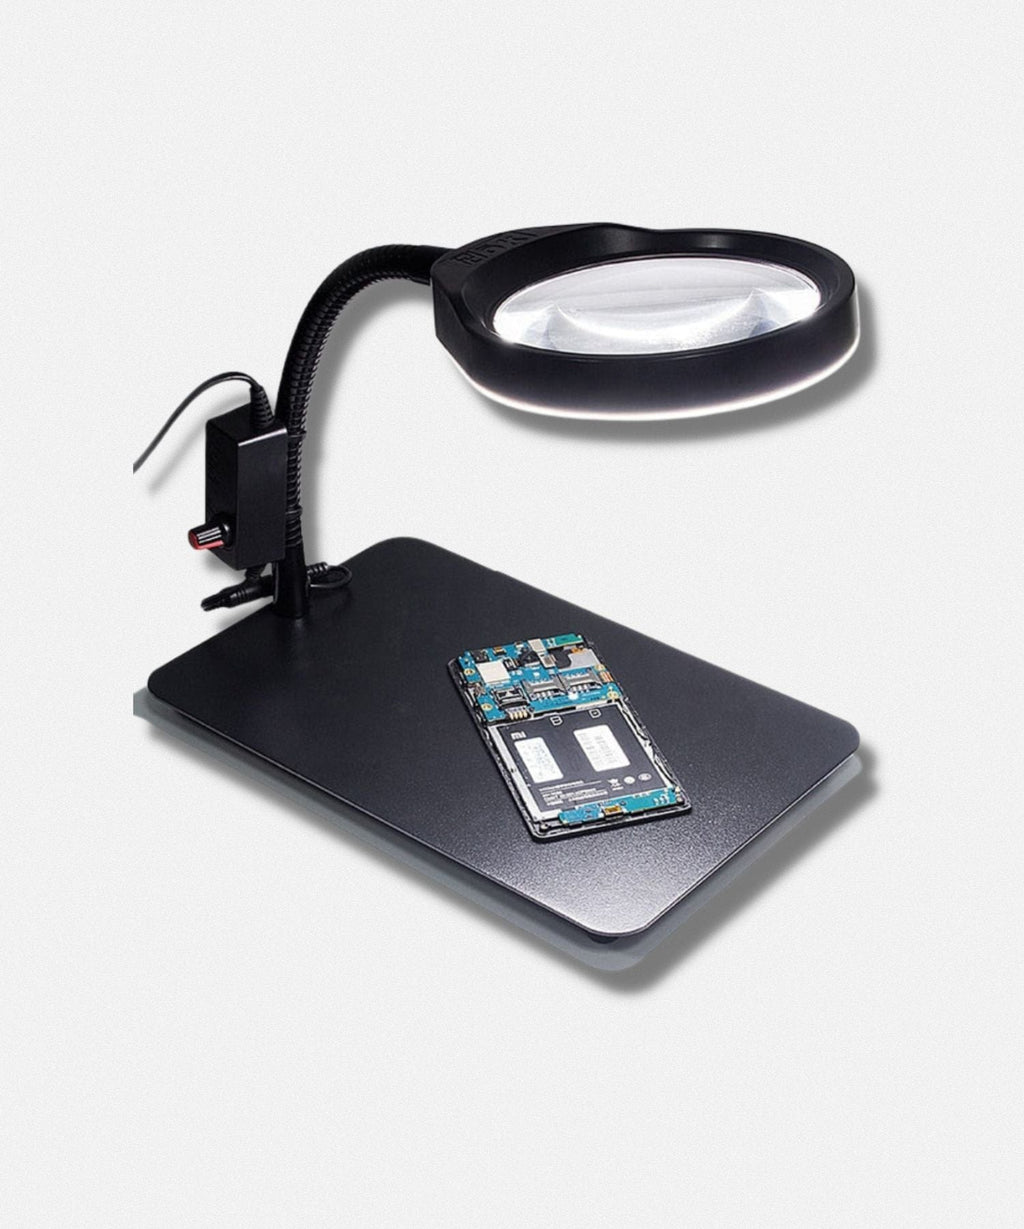 Lampe loupe sur pied 1001 - 3 dioptries